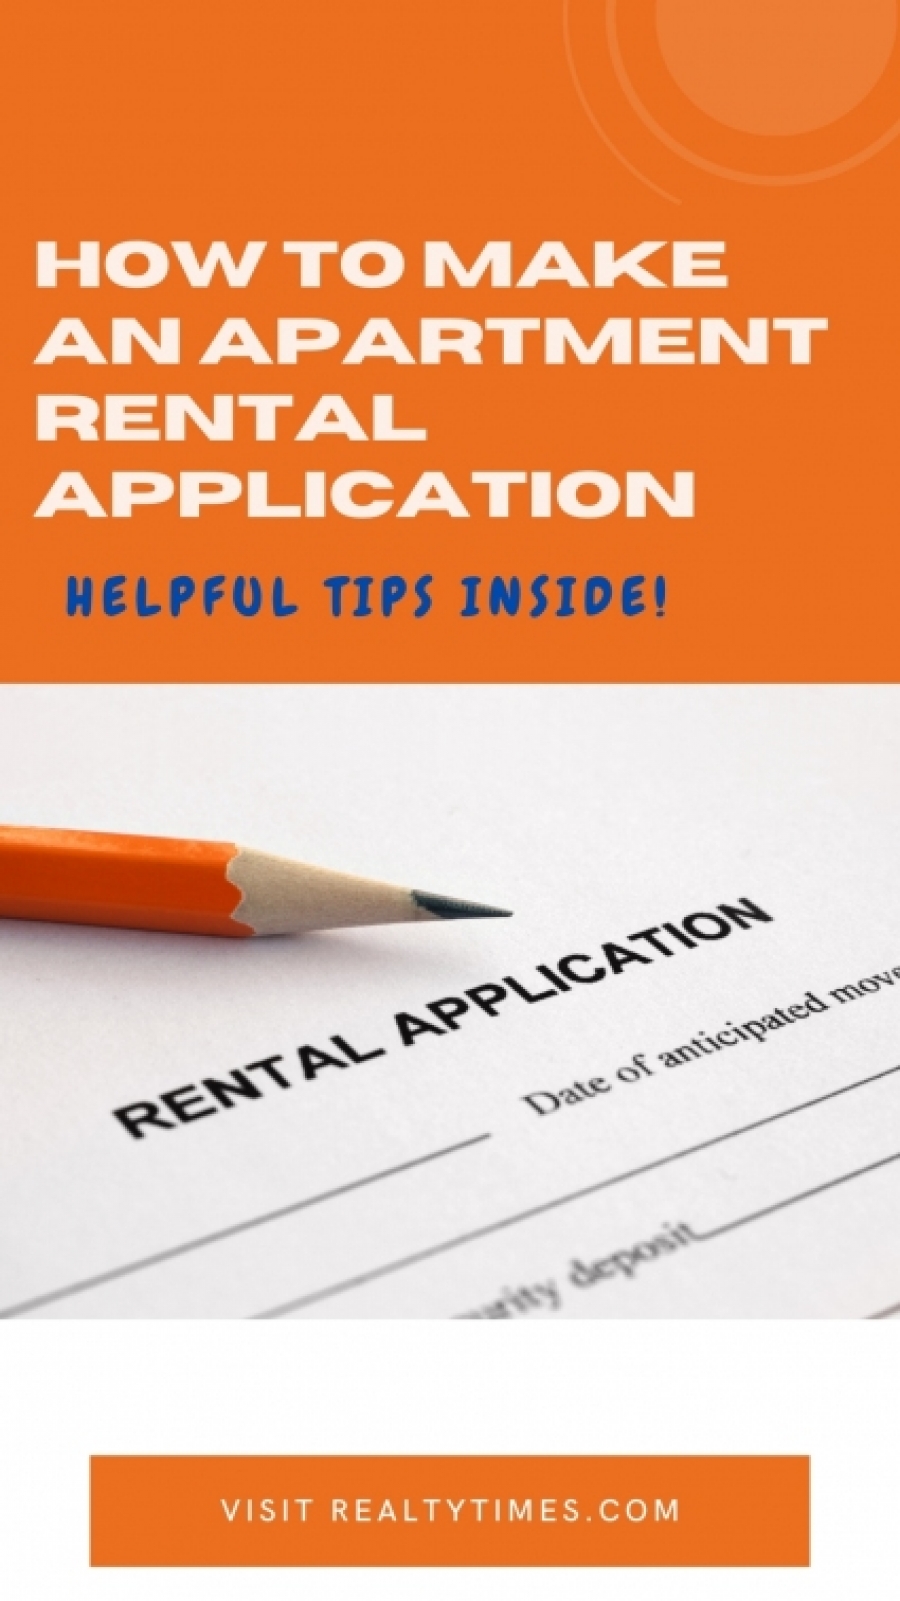 Apartment Rental Applications Explained